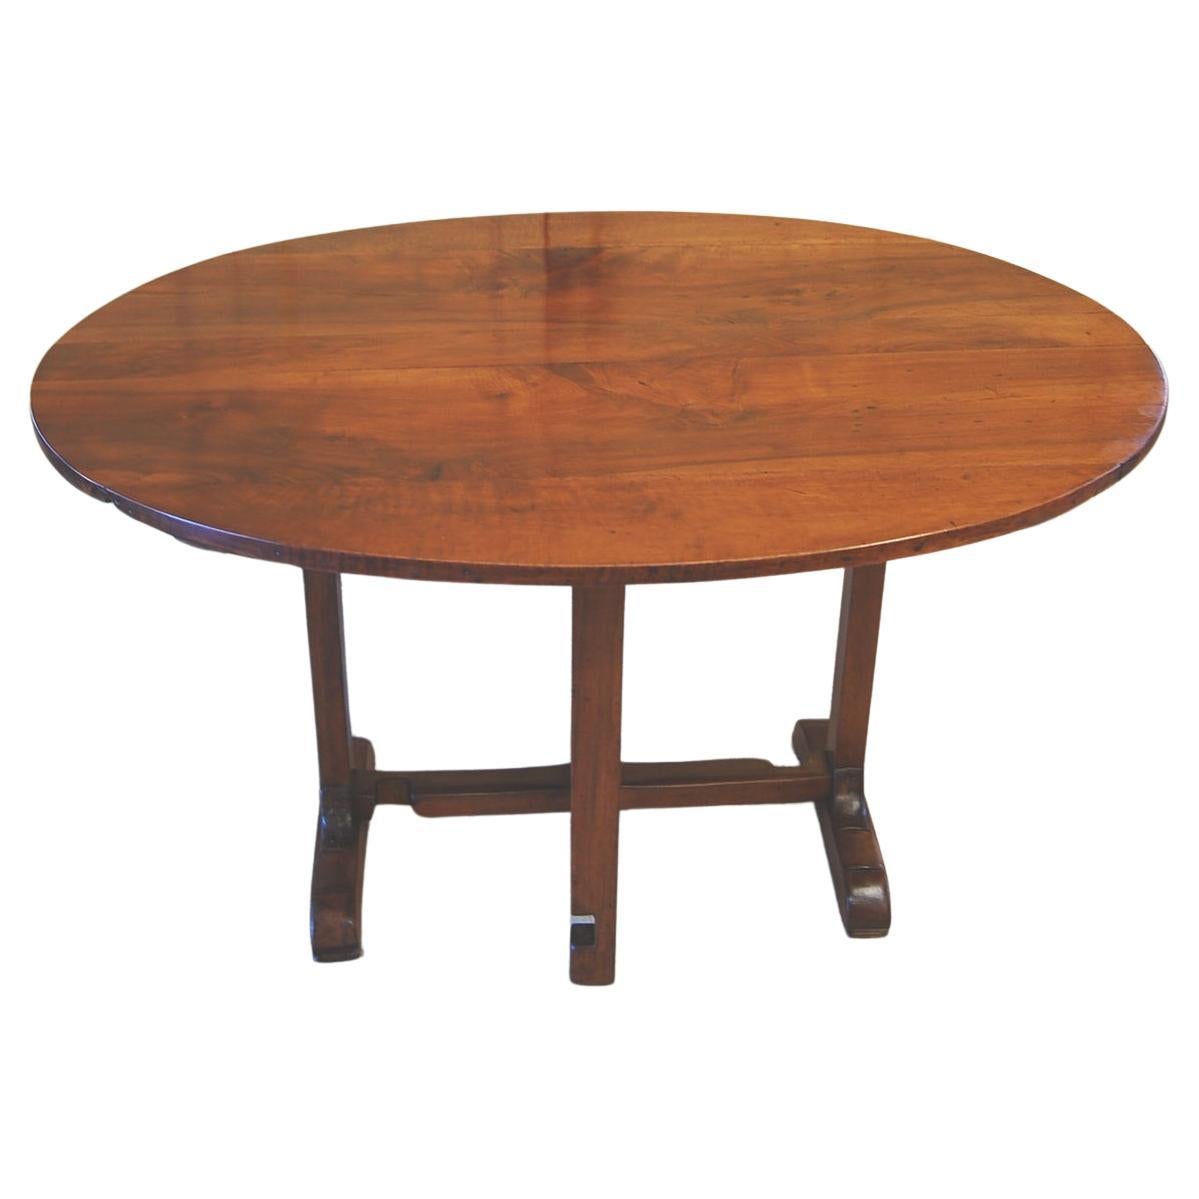 French  Mid 19th Century Oval Walnut Vendange Table with Tilting Mechanism For Sale